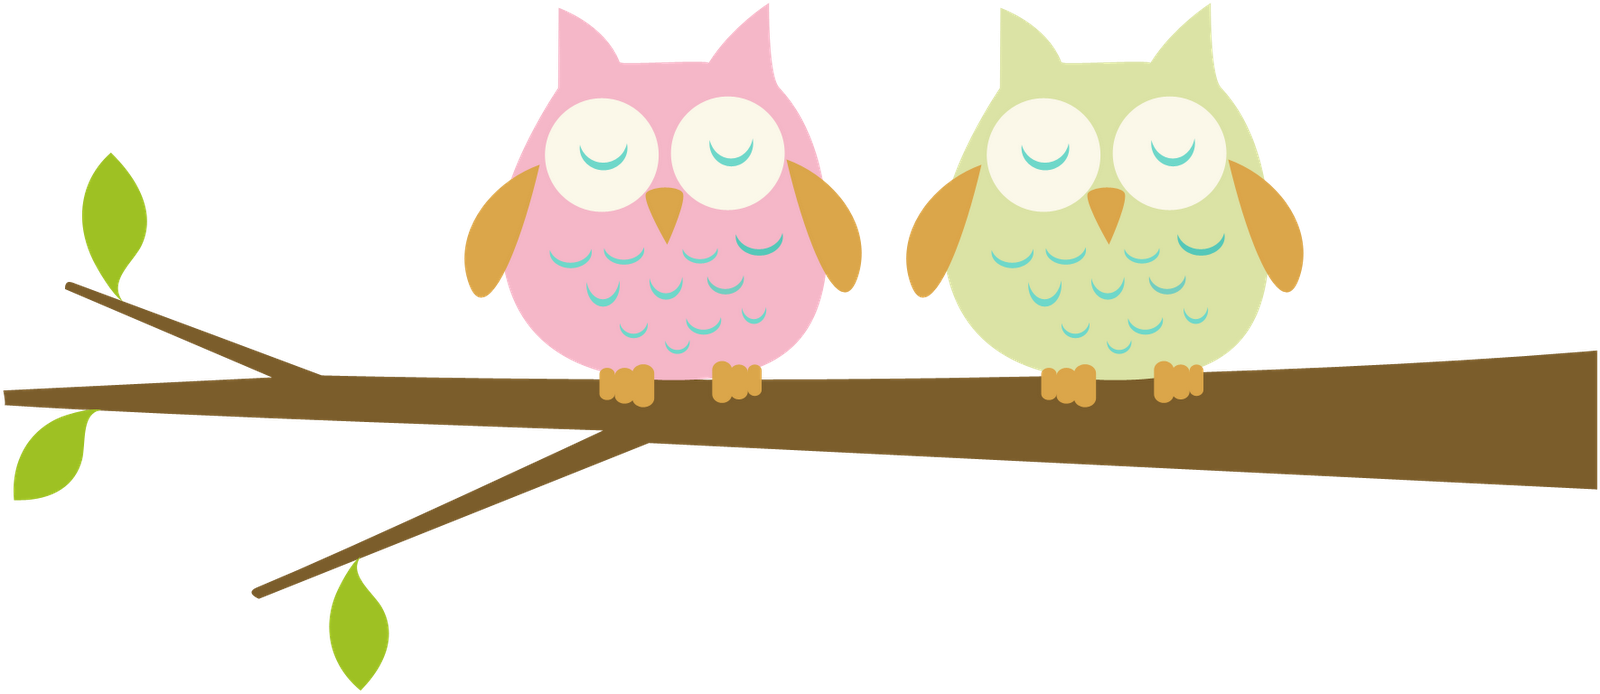 16 Baby Owl Clip Art Free Cliparts That You Can Download To You